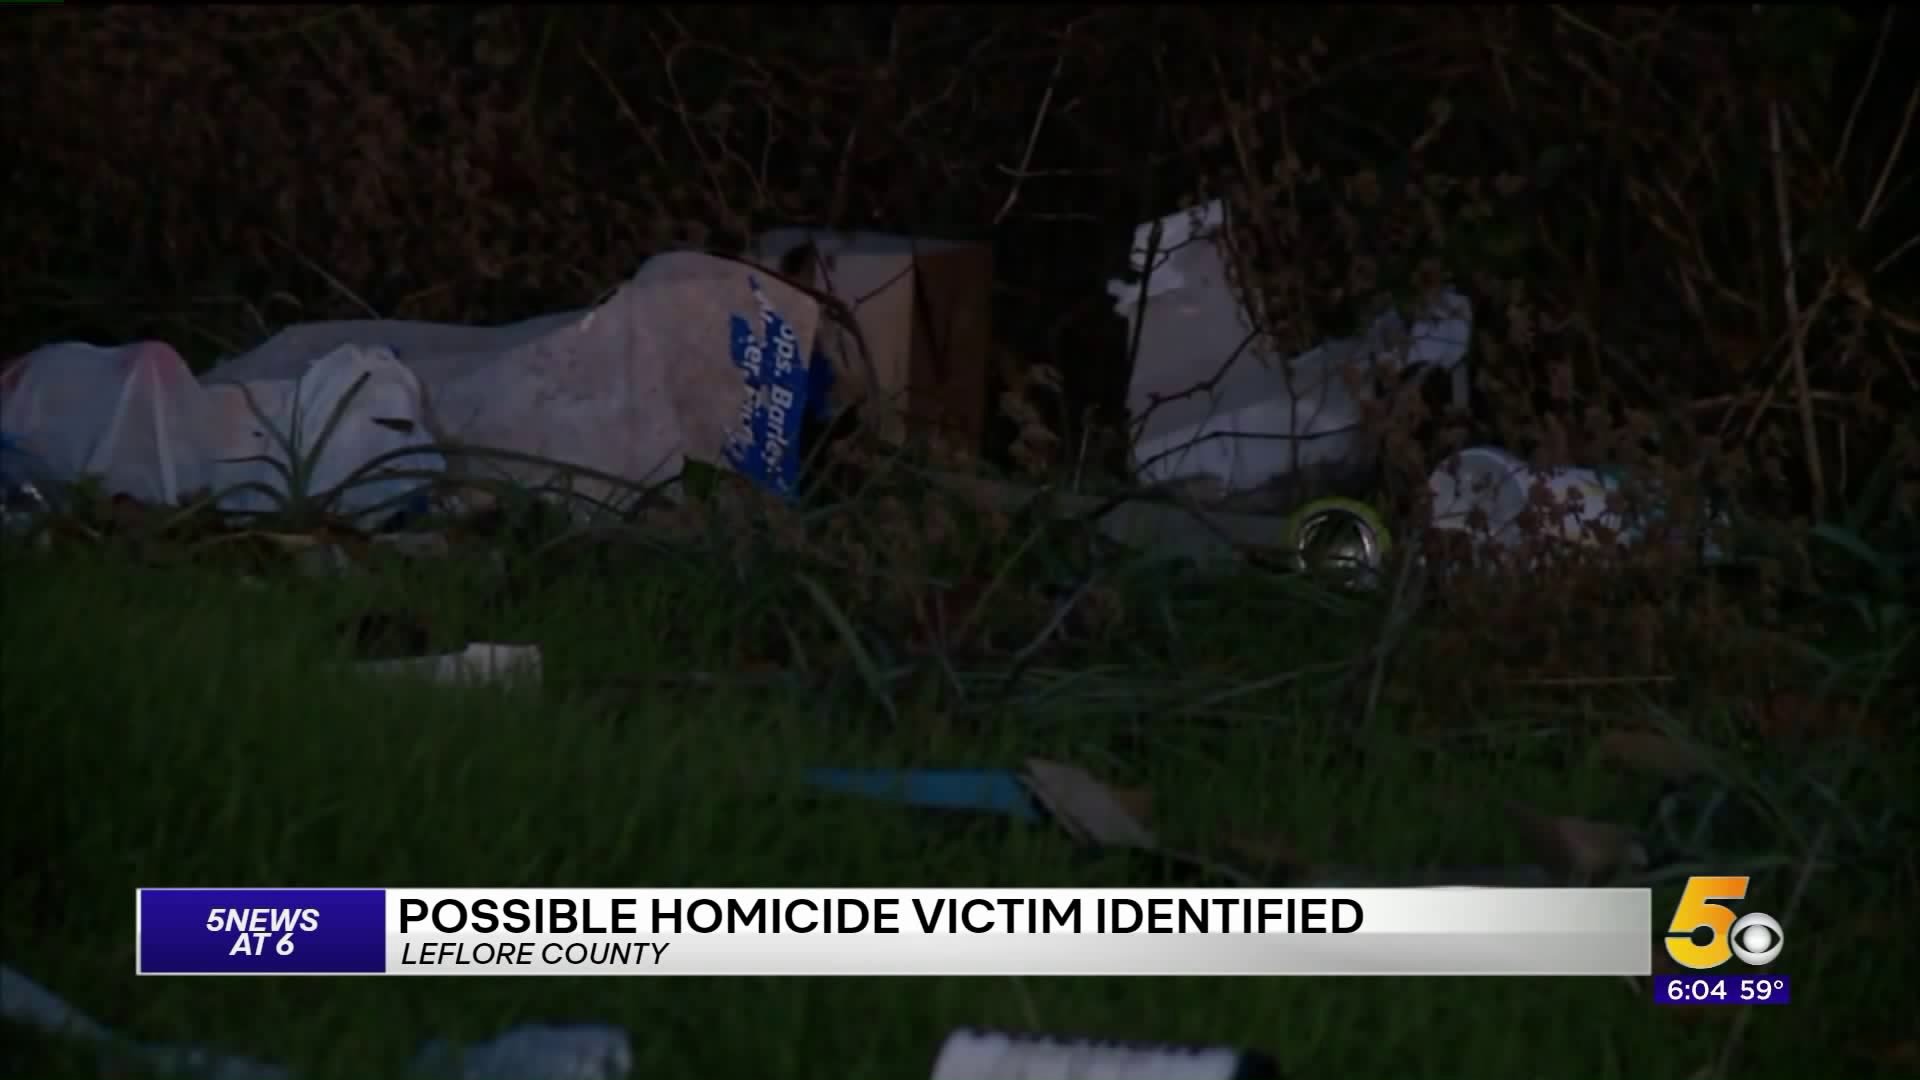 Police Identify Possible Homicide Victim In LeFlore County